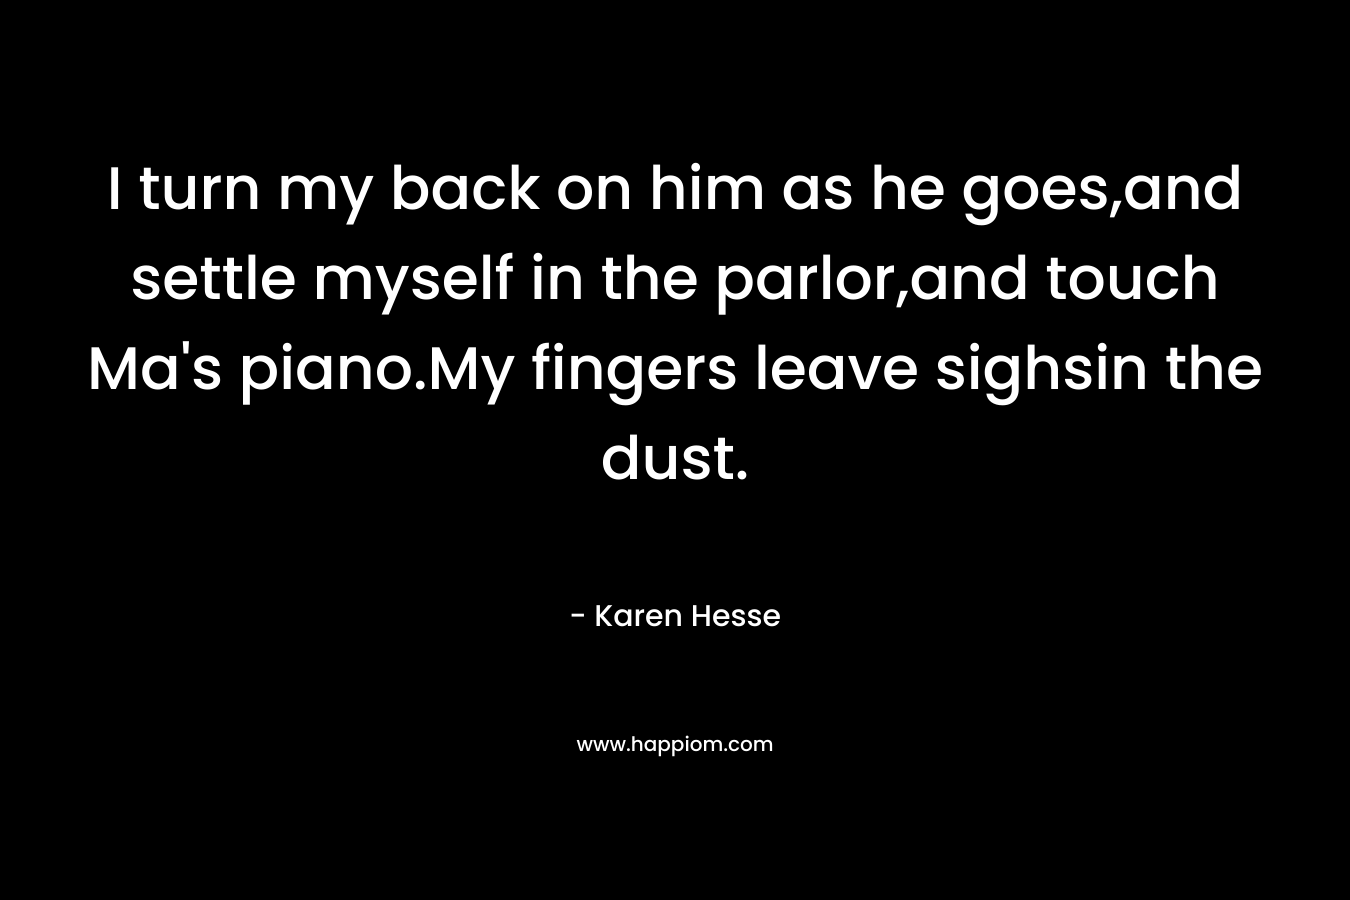 I turn my back on him as he goes,and settle myself in the parlor,and touch Ma’s piano.My fingers leave sighsin the dust. – Karen Hesse